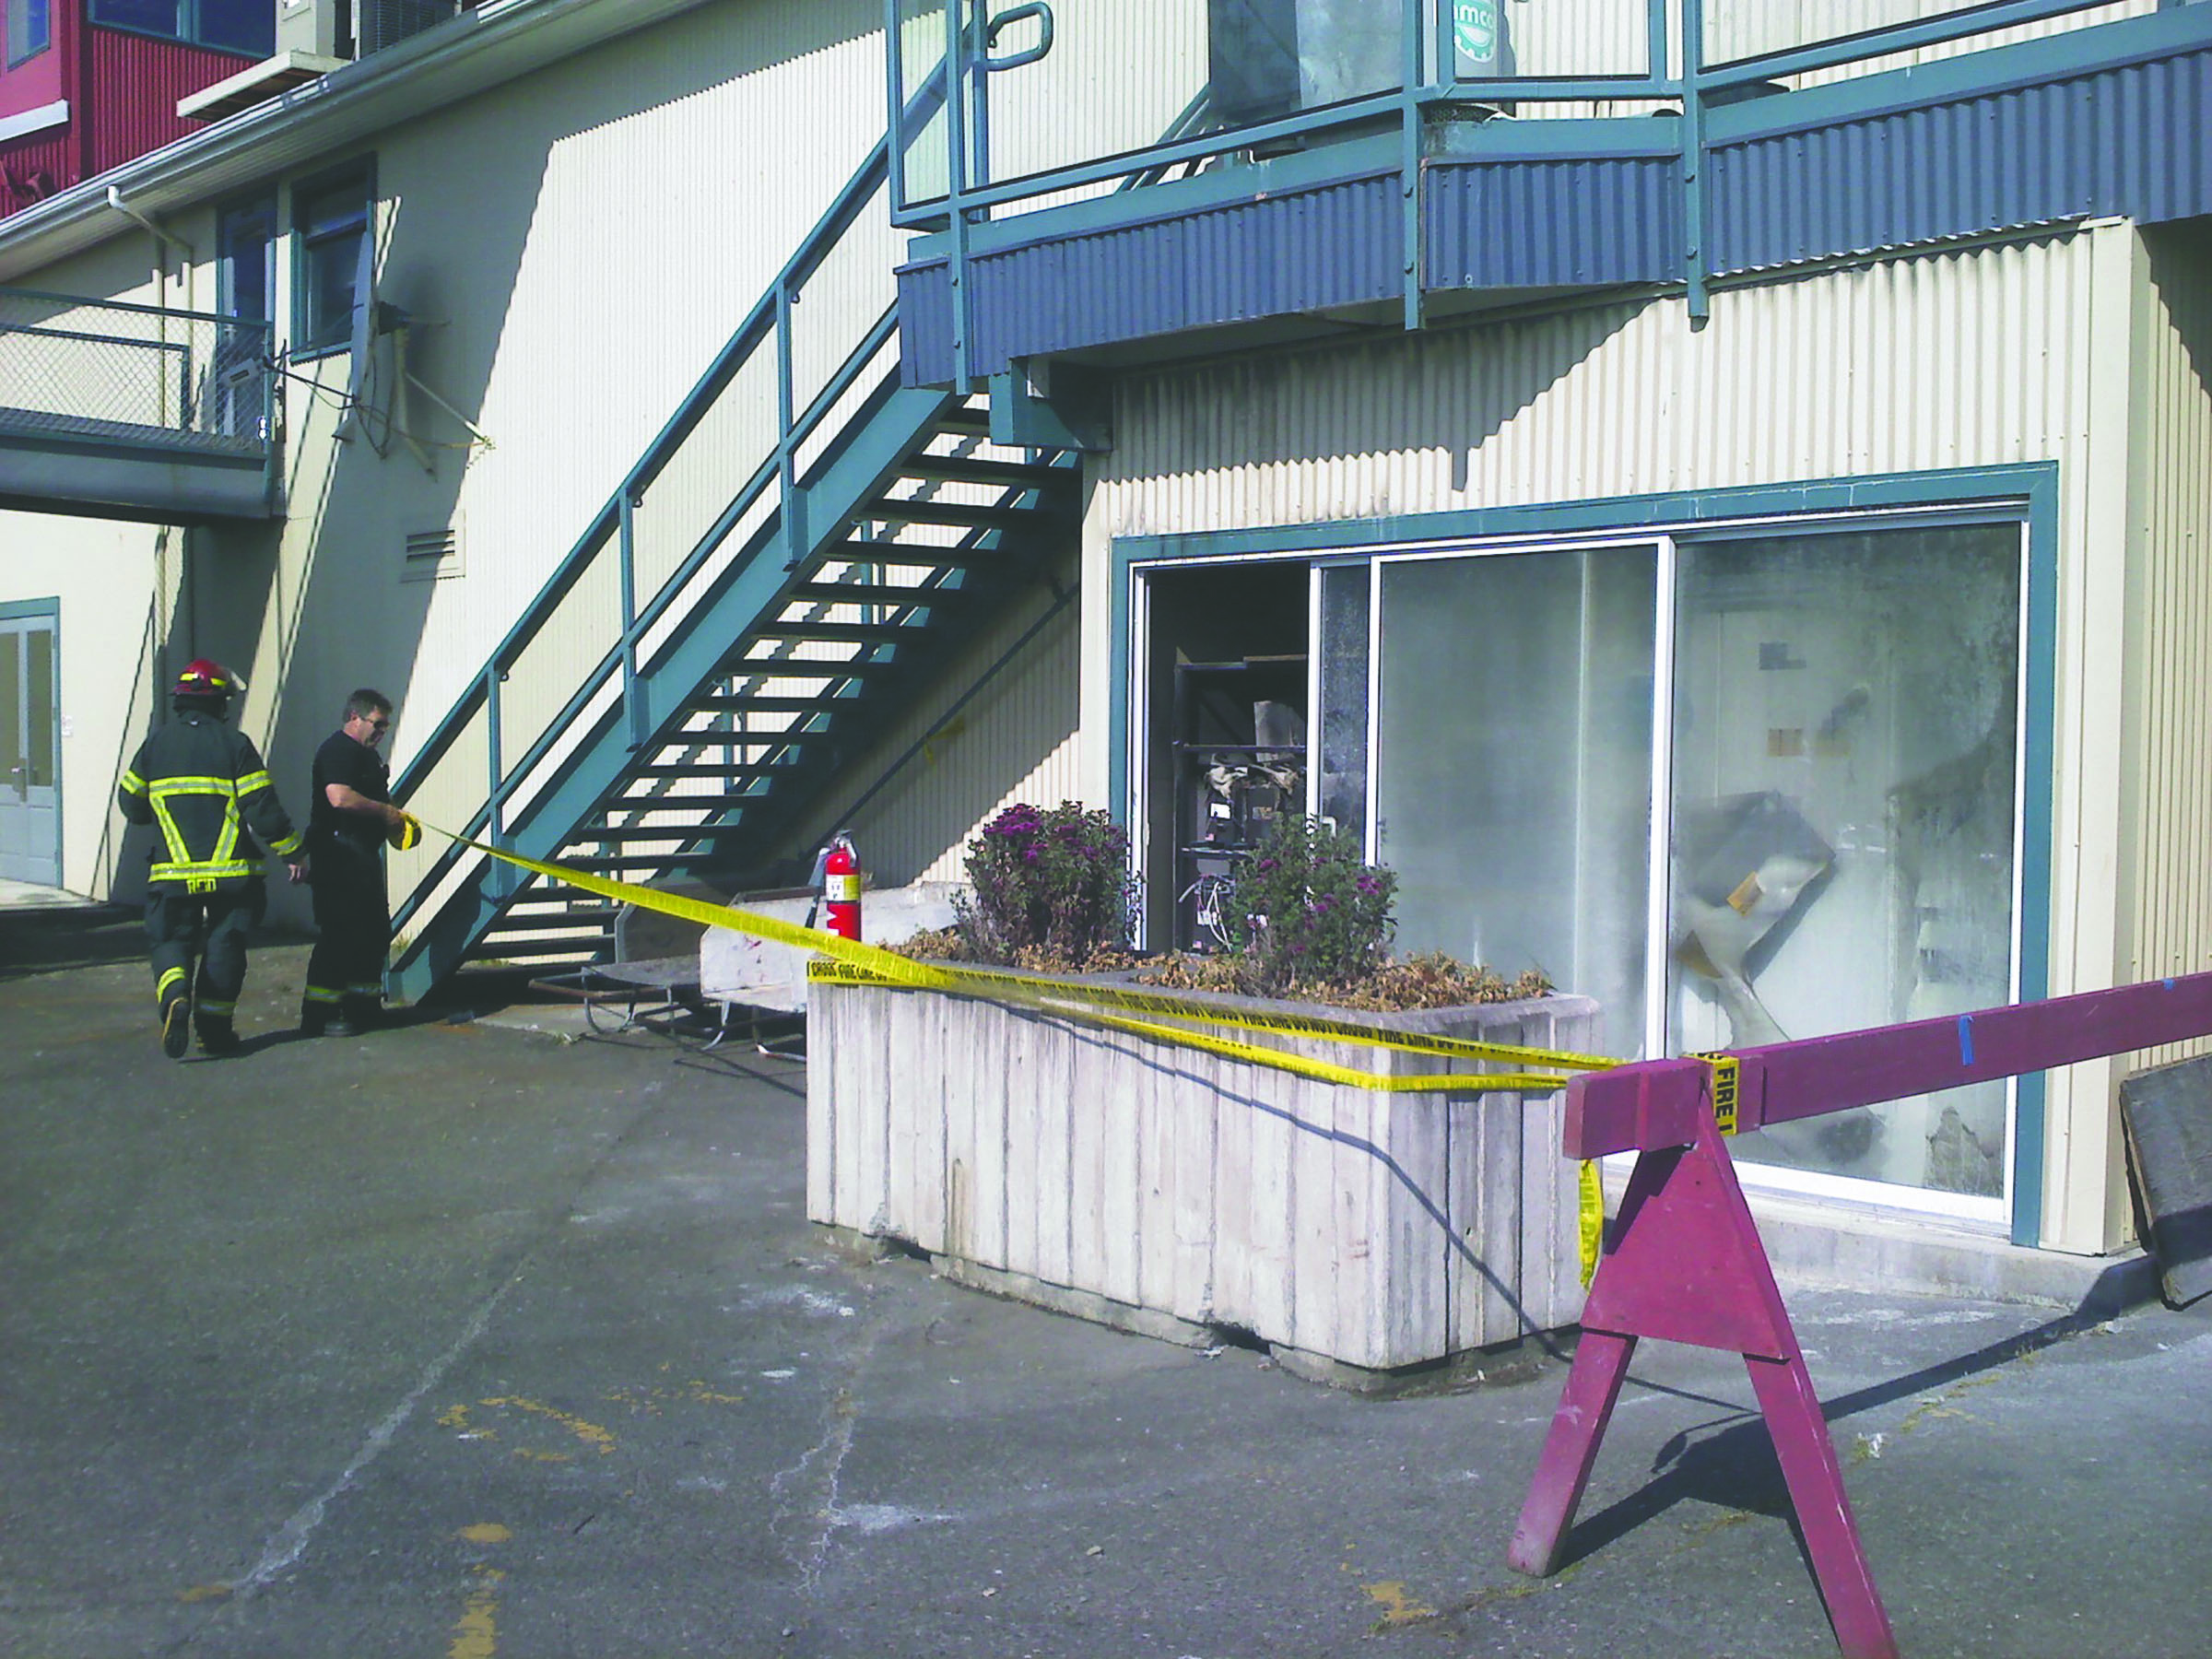 Firefighters tape off an area around the battery room where a small fire broke out this morning at The Landing mall in Port Angeles.  -- Photo by Arwyn Rice/Peninsula Daily News